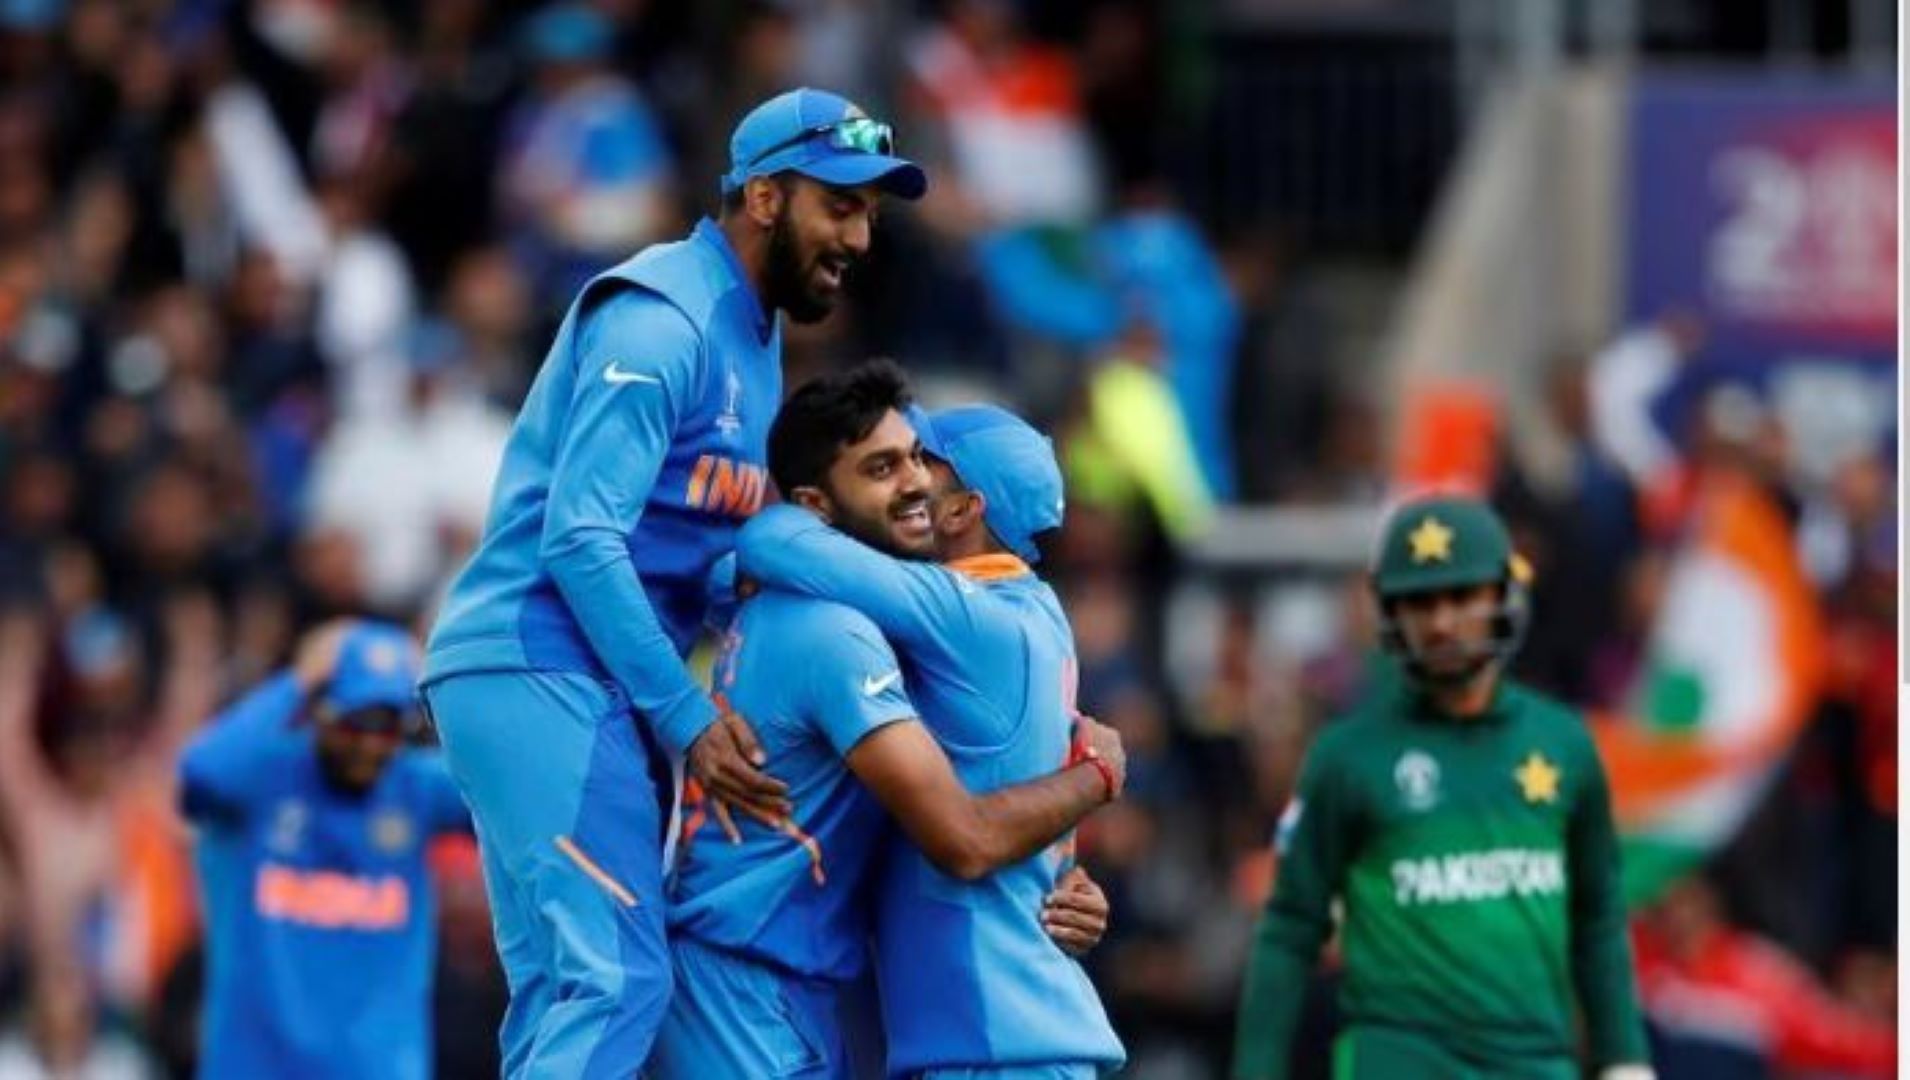 India trounced Pakistan the last time the sides met in an ODI.